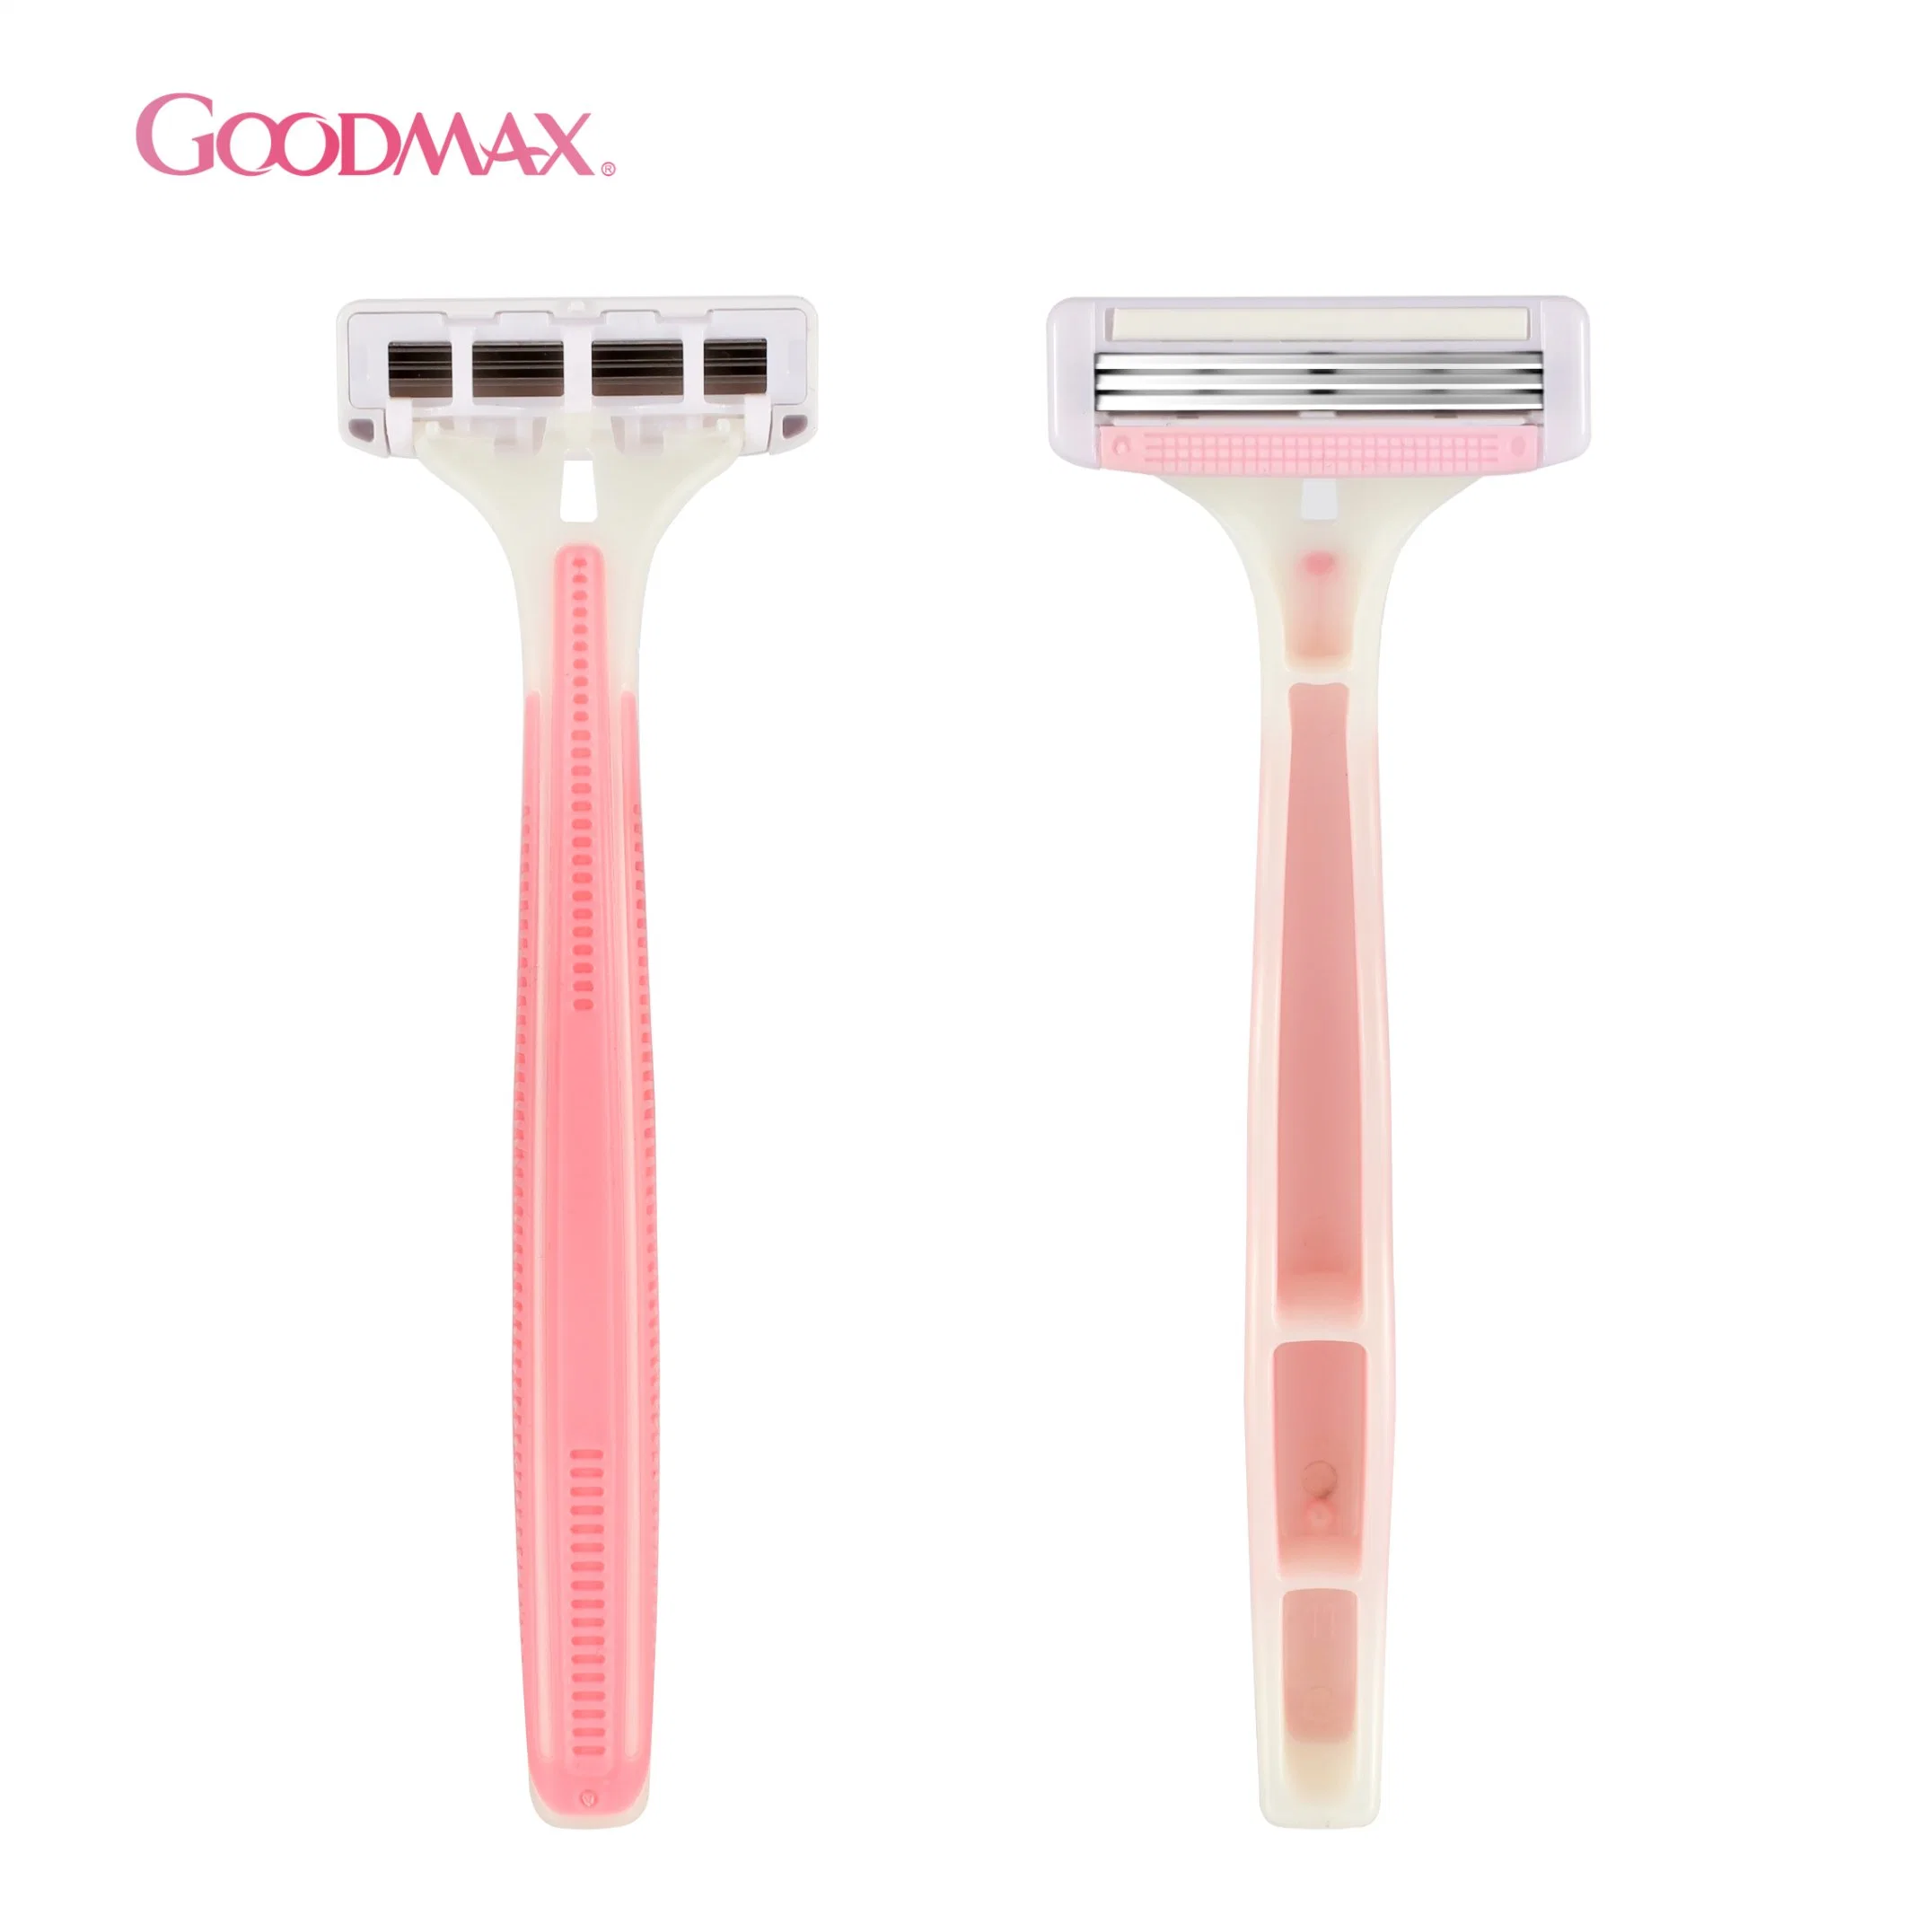 Easy Cleaning New Plastic Handle Triple Blade Disposable Razor for Men